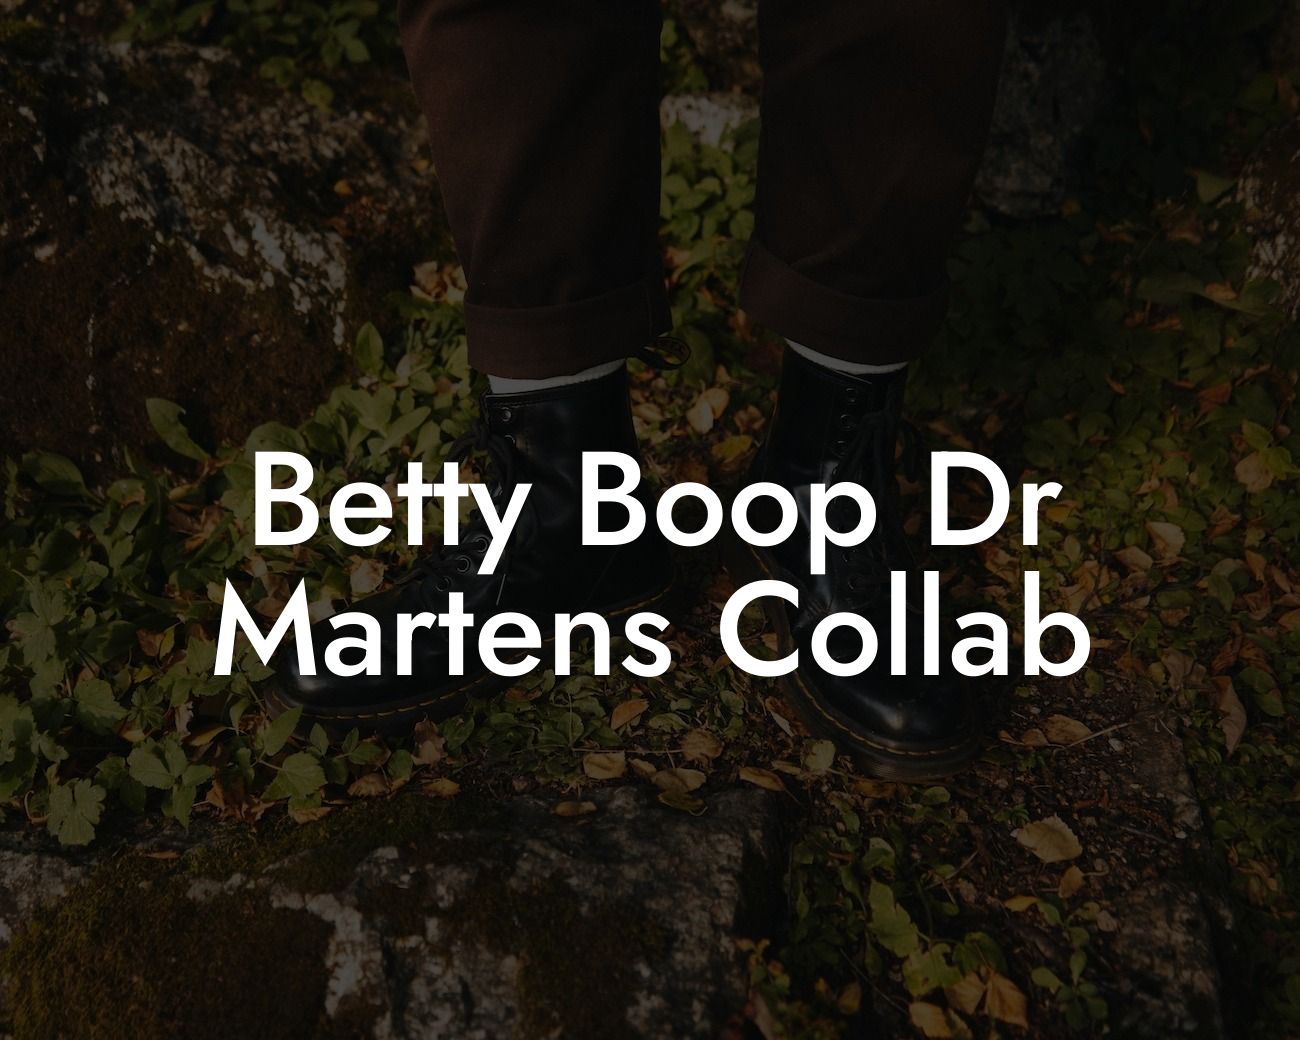 Betty Boop Dr Martens Collab